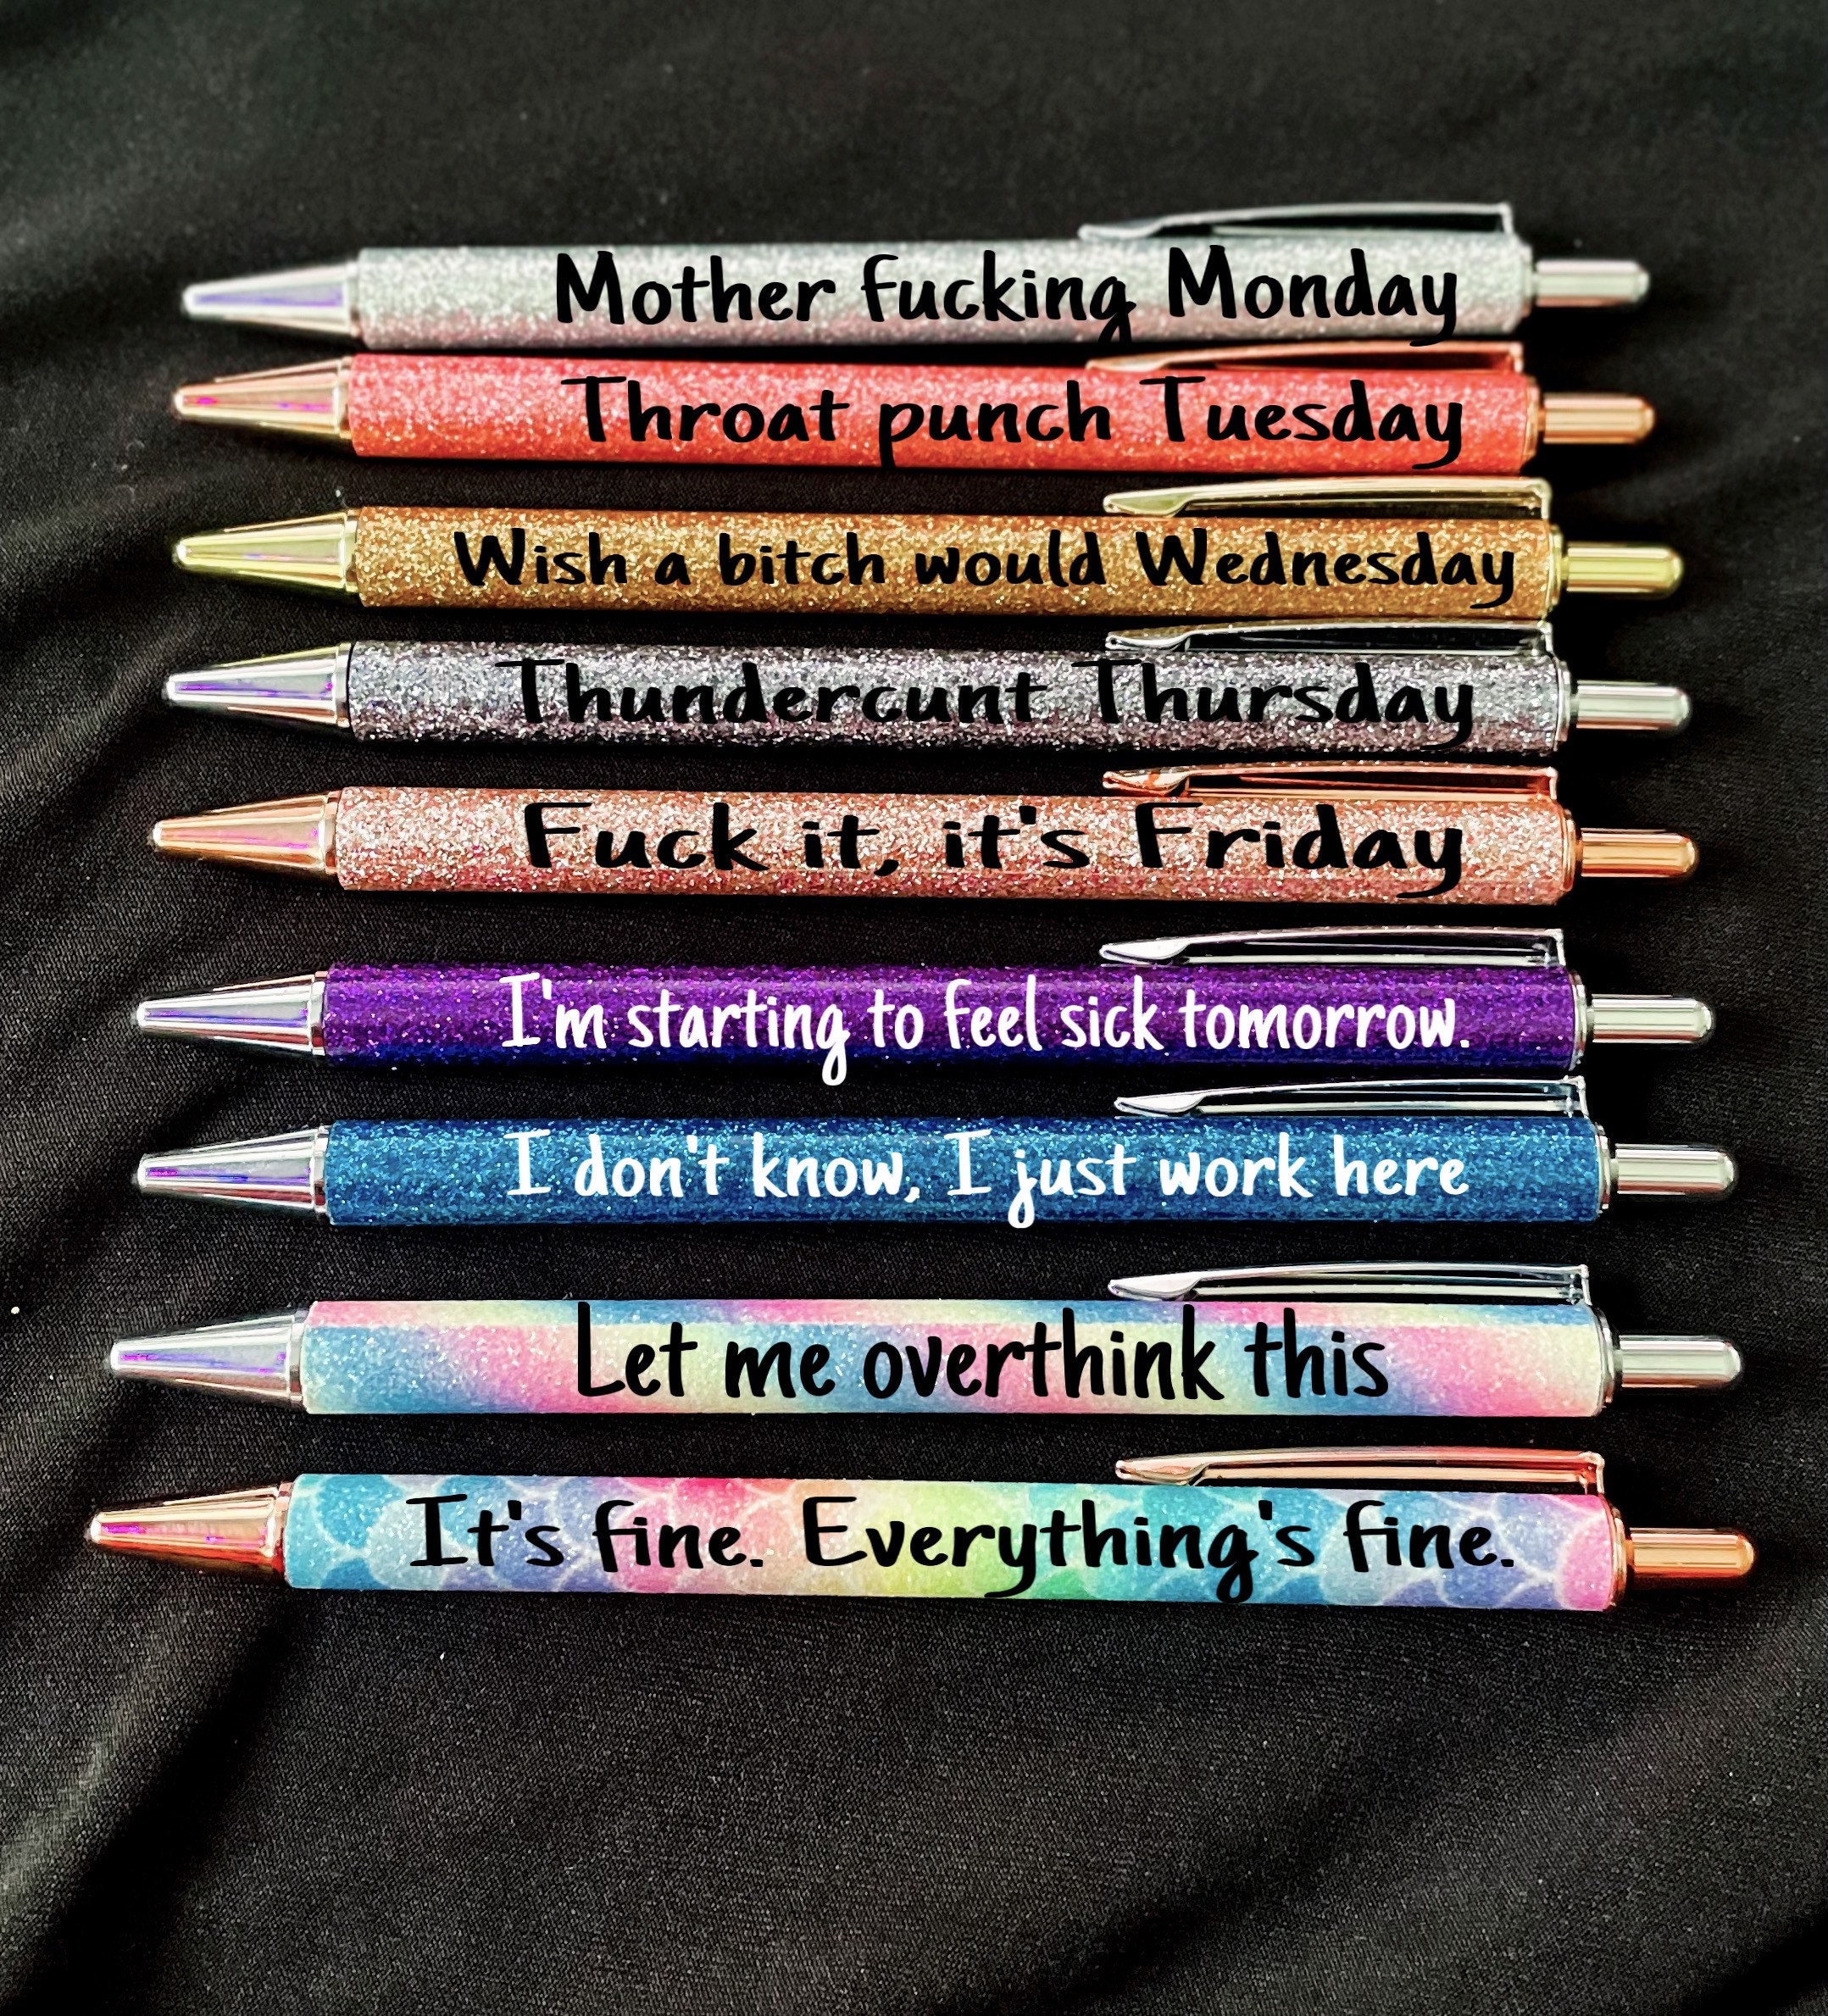 Funny Pens Set For Adults Ballpoint Pen Premium Novelty Pens Set Days Of  The Week Pens Dirty Cuss Word Pens For Each Day Funny Office Gifts For  Cowor